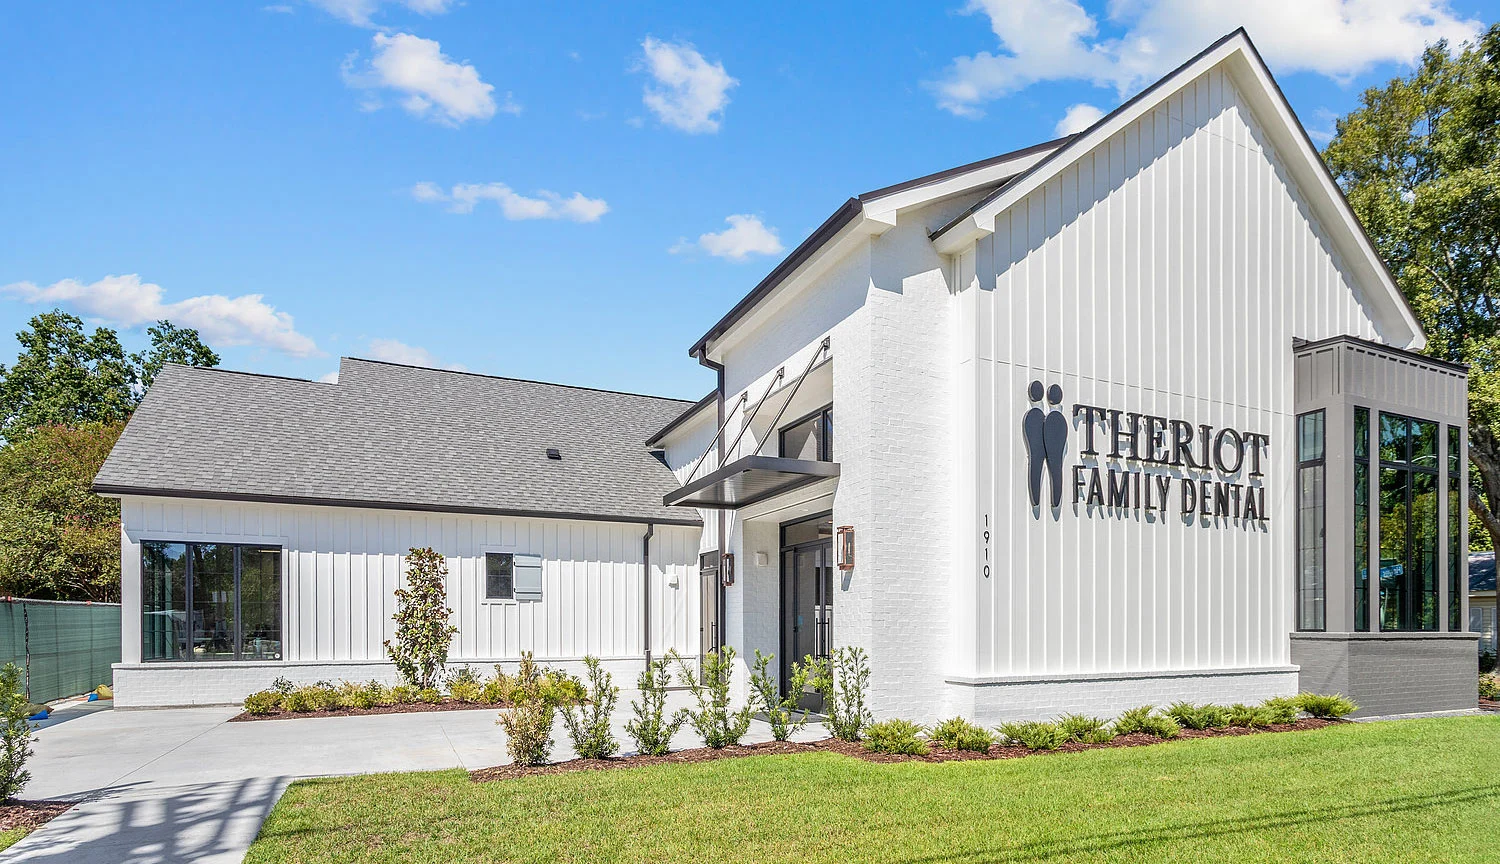 Theriot Family Dental